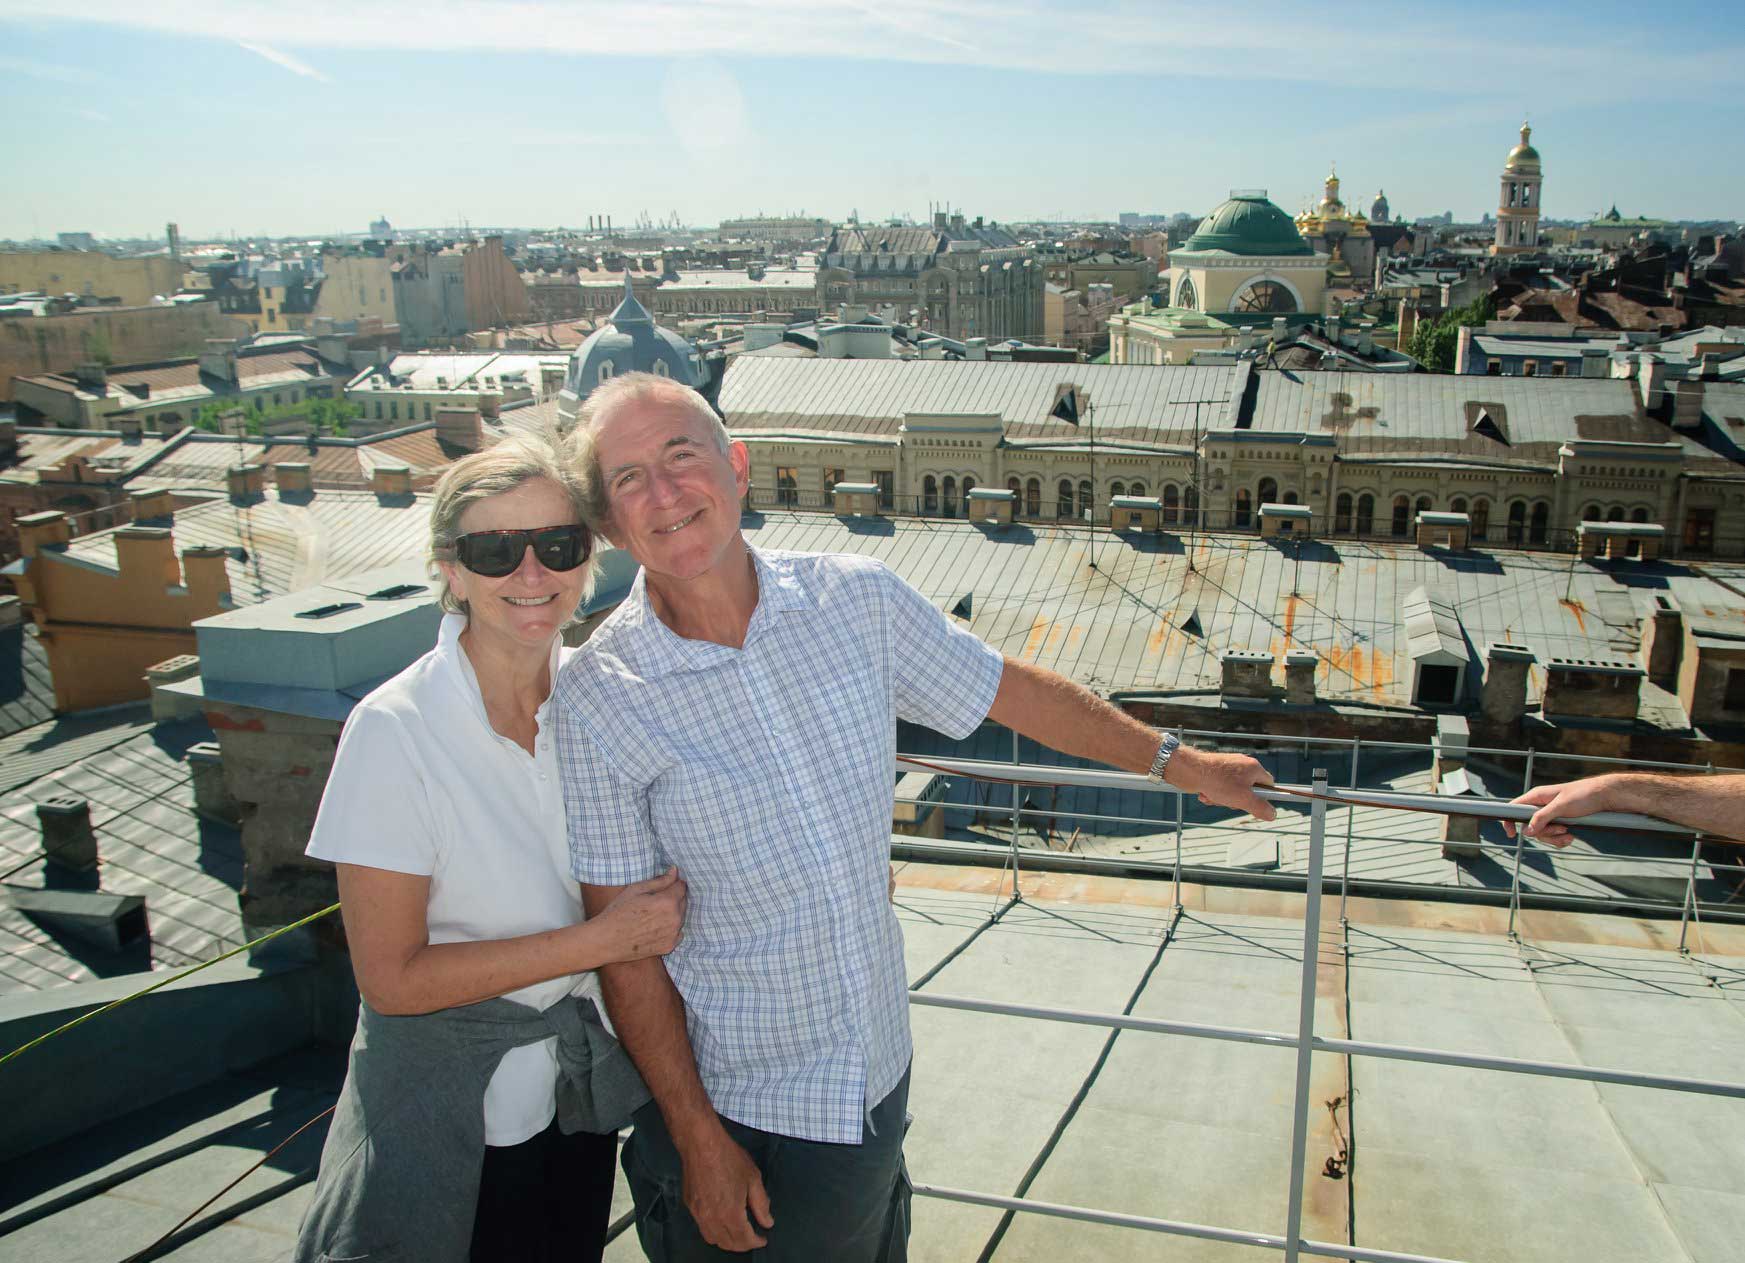 St Petersburg Russia tours: Our guests, Snezana and George Poljak, on the roofs of St....